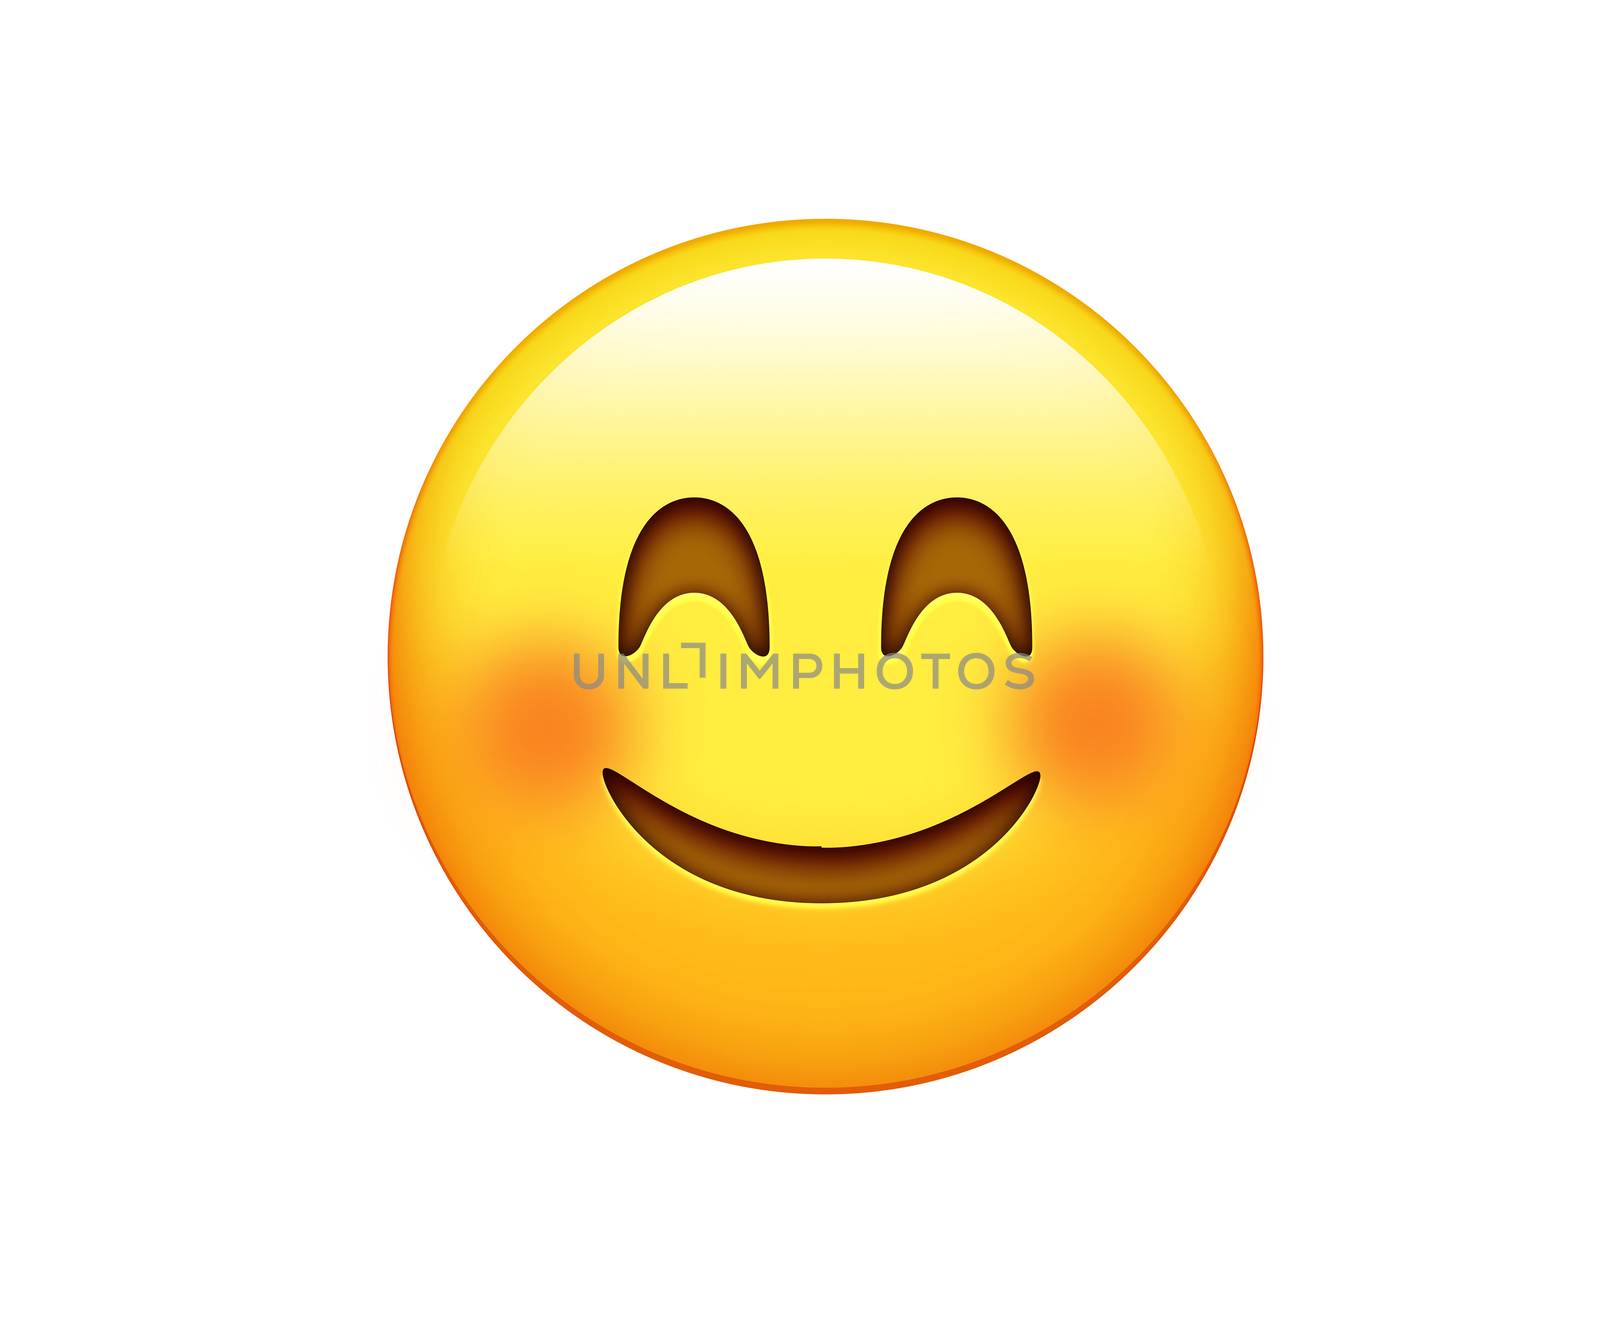 Isolated yellow face with red cheeks and smiling eyes icon